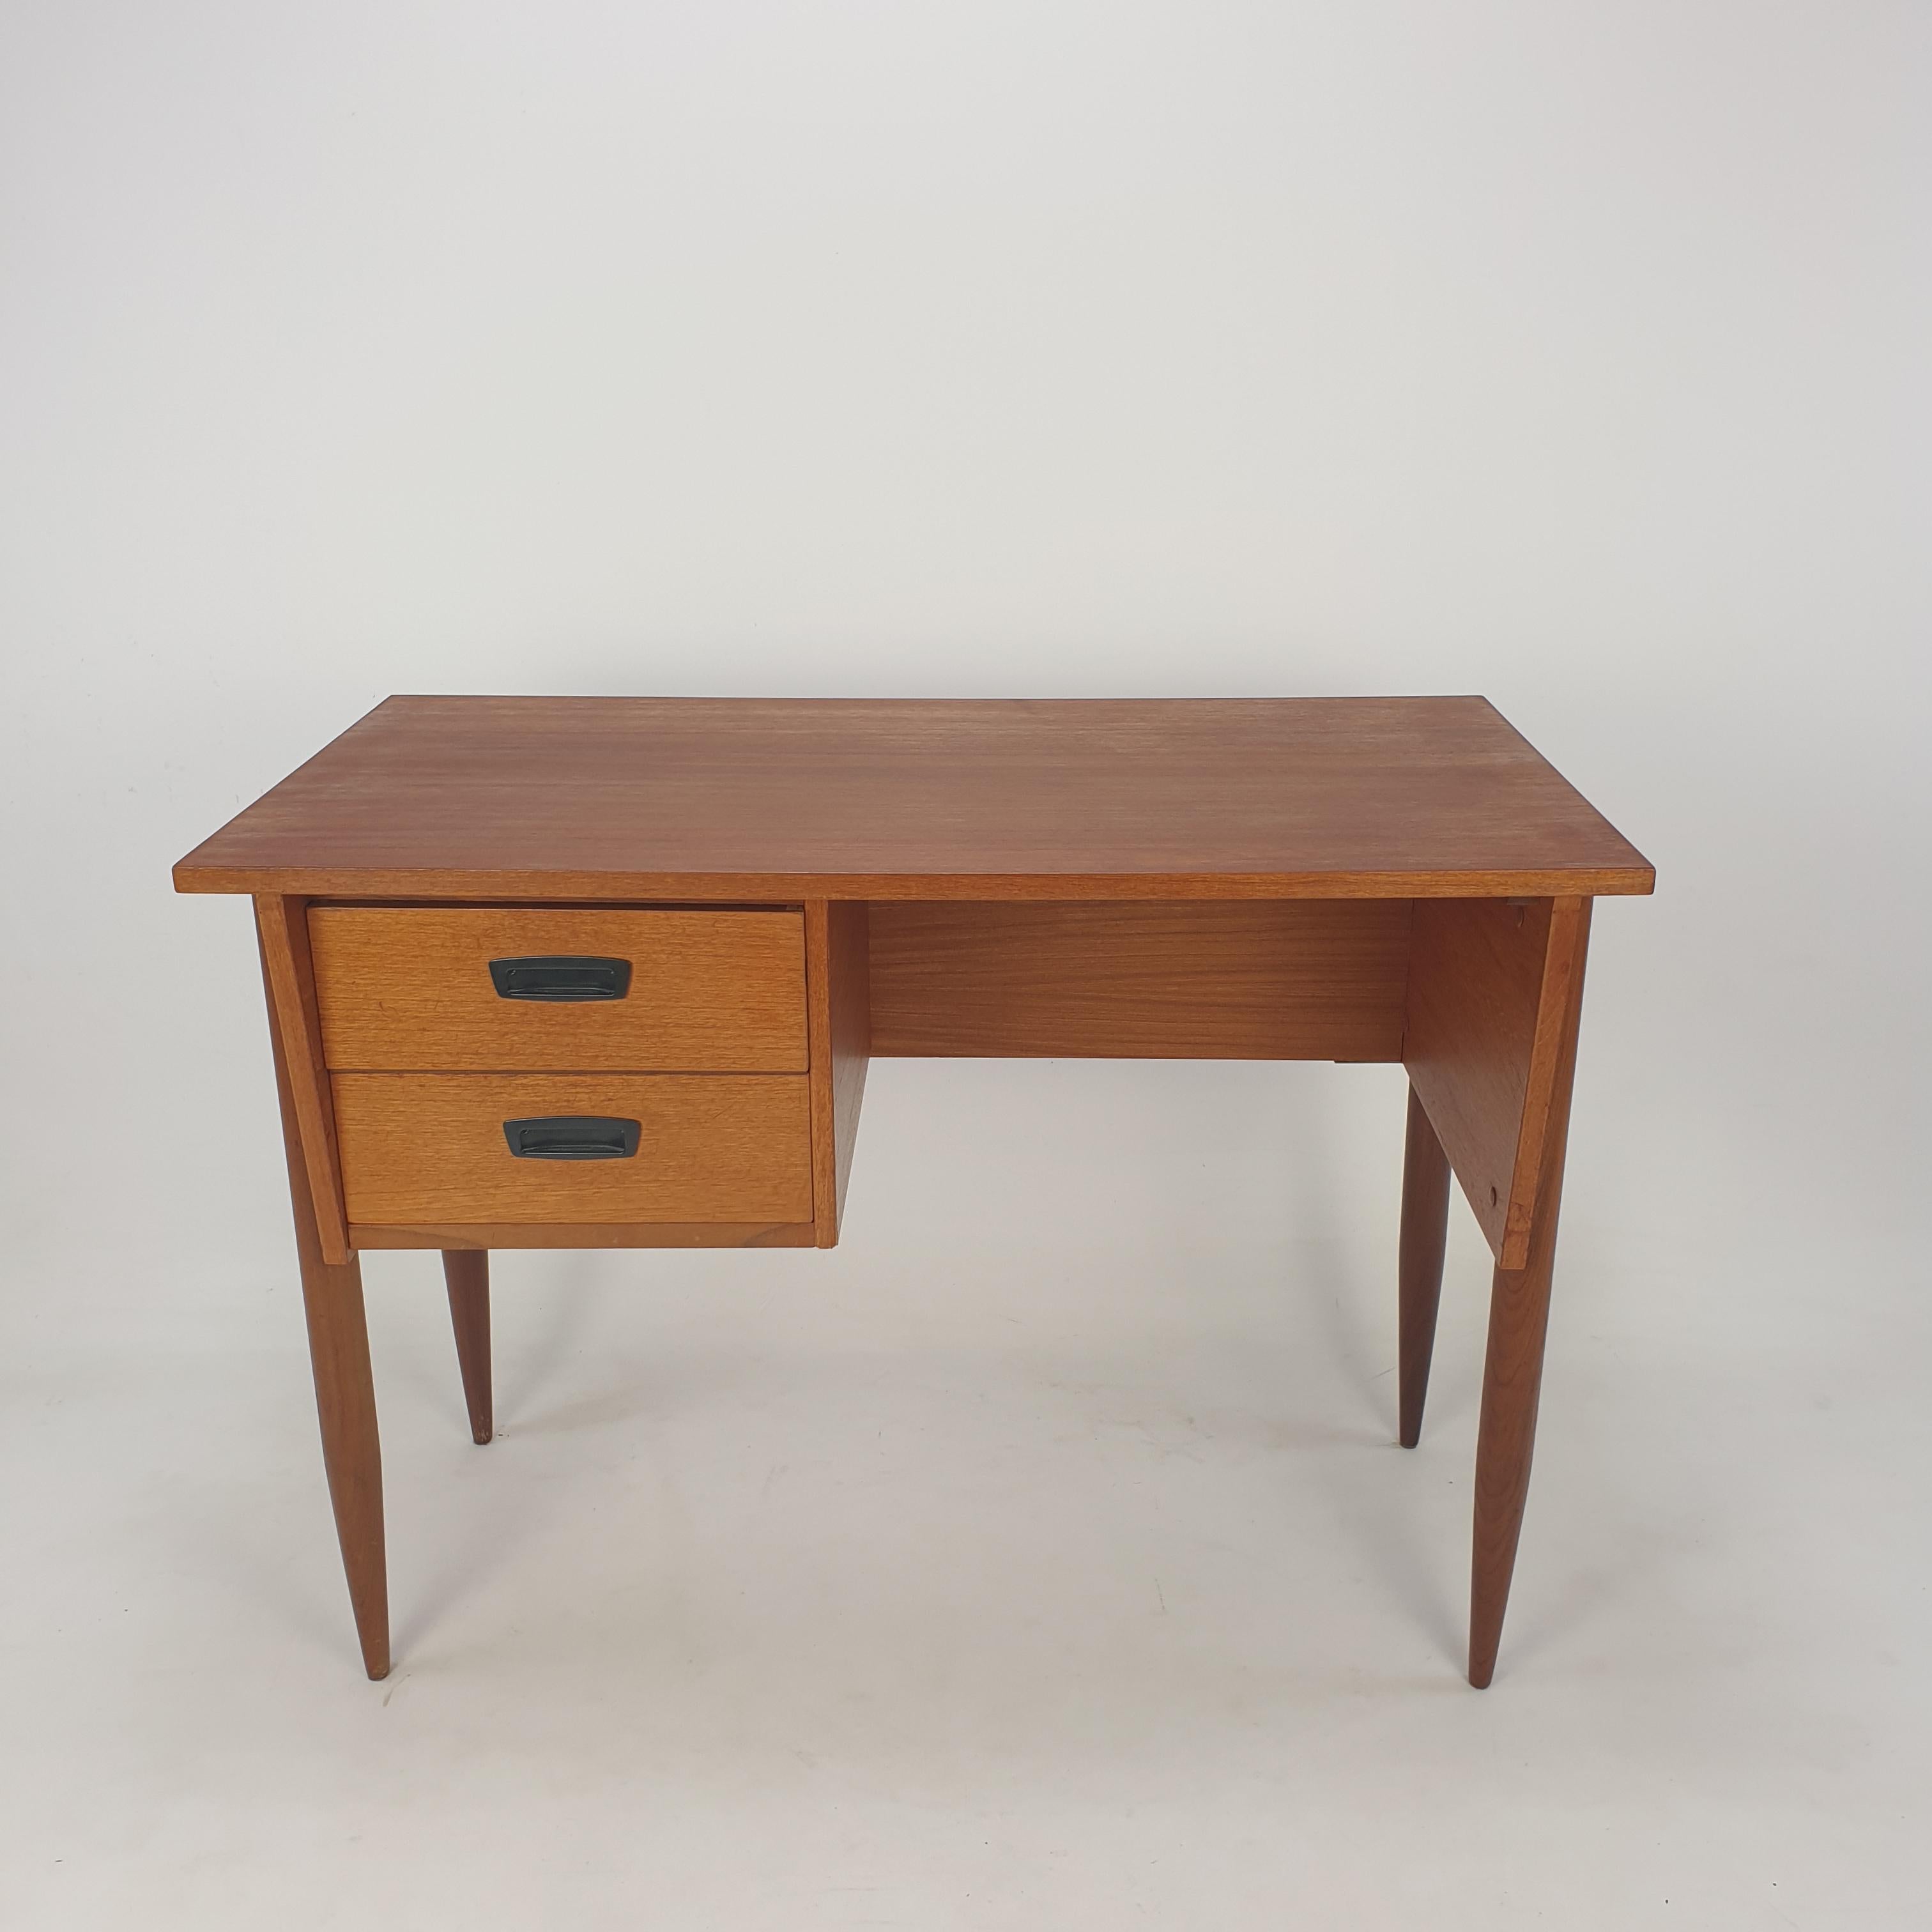 Very nice mid century Danish teak desk. 
It is fabricated in the 60's.

Two drawers with the original bakelite handles.

This desk is in great vintage condition.
  